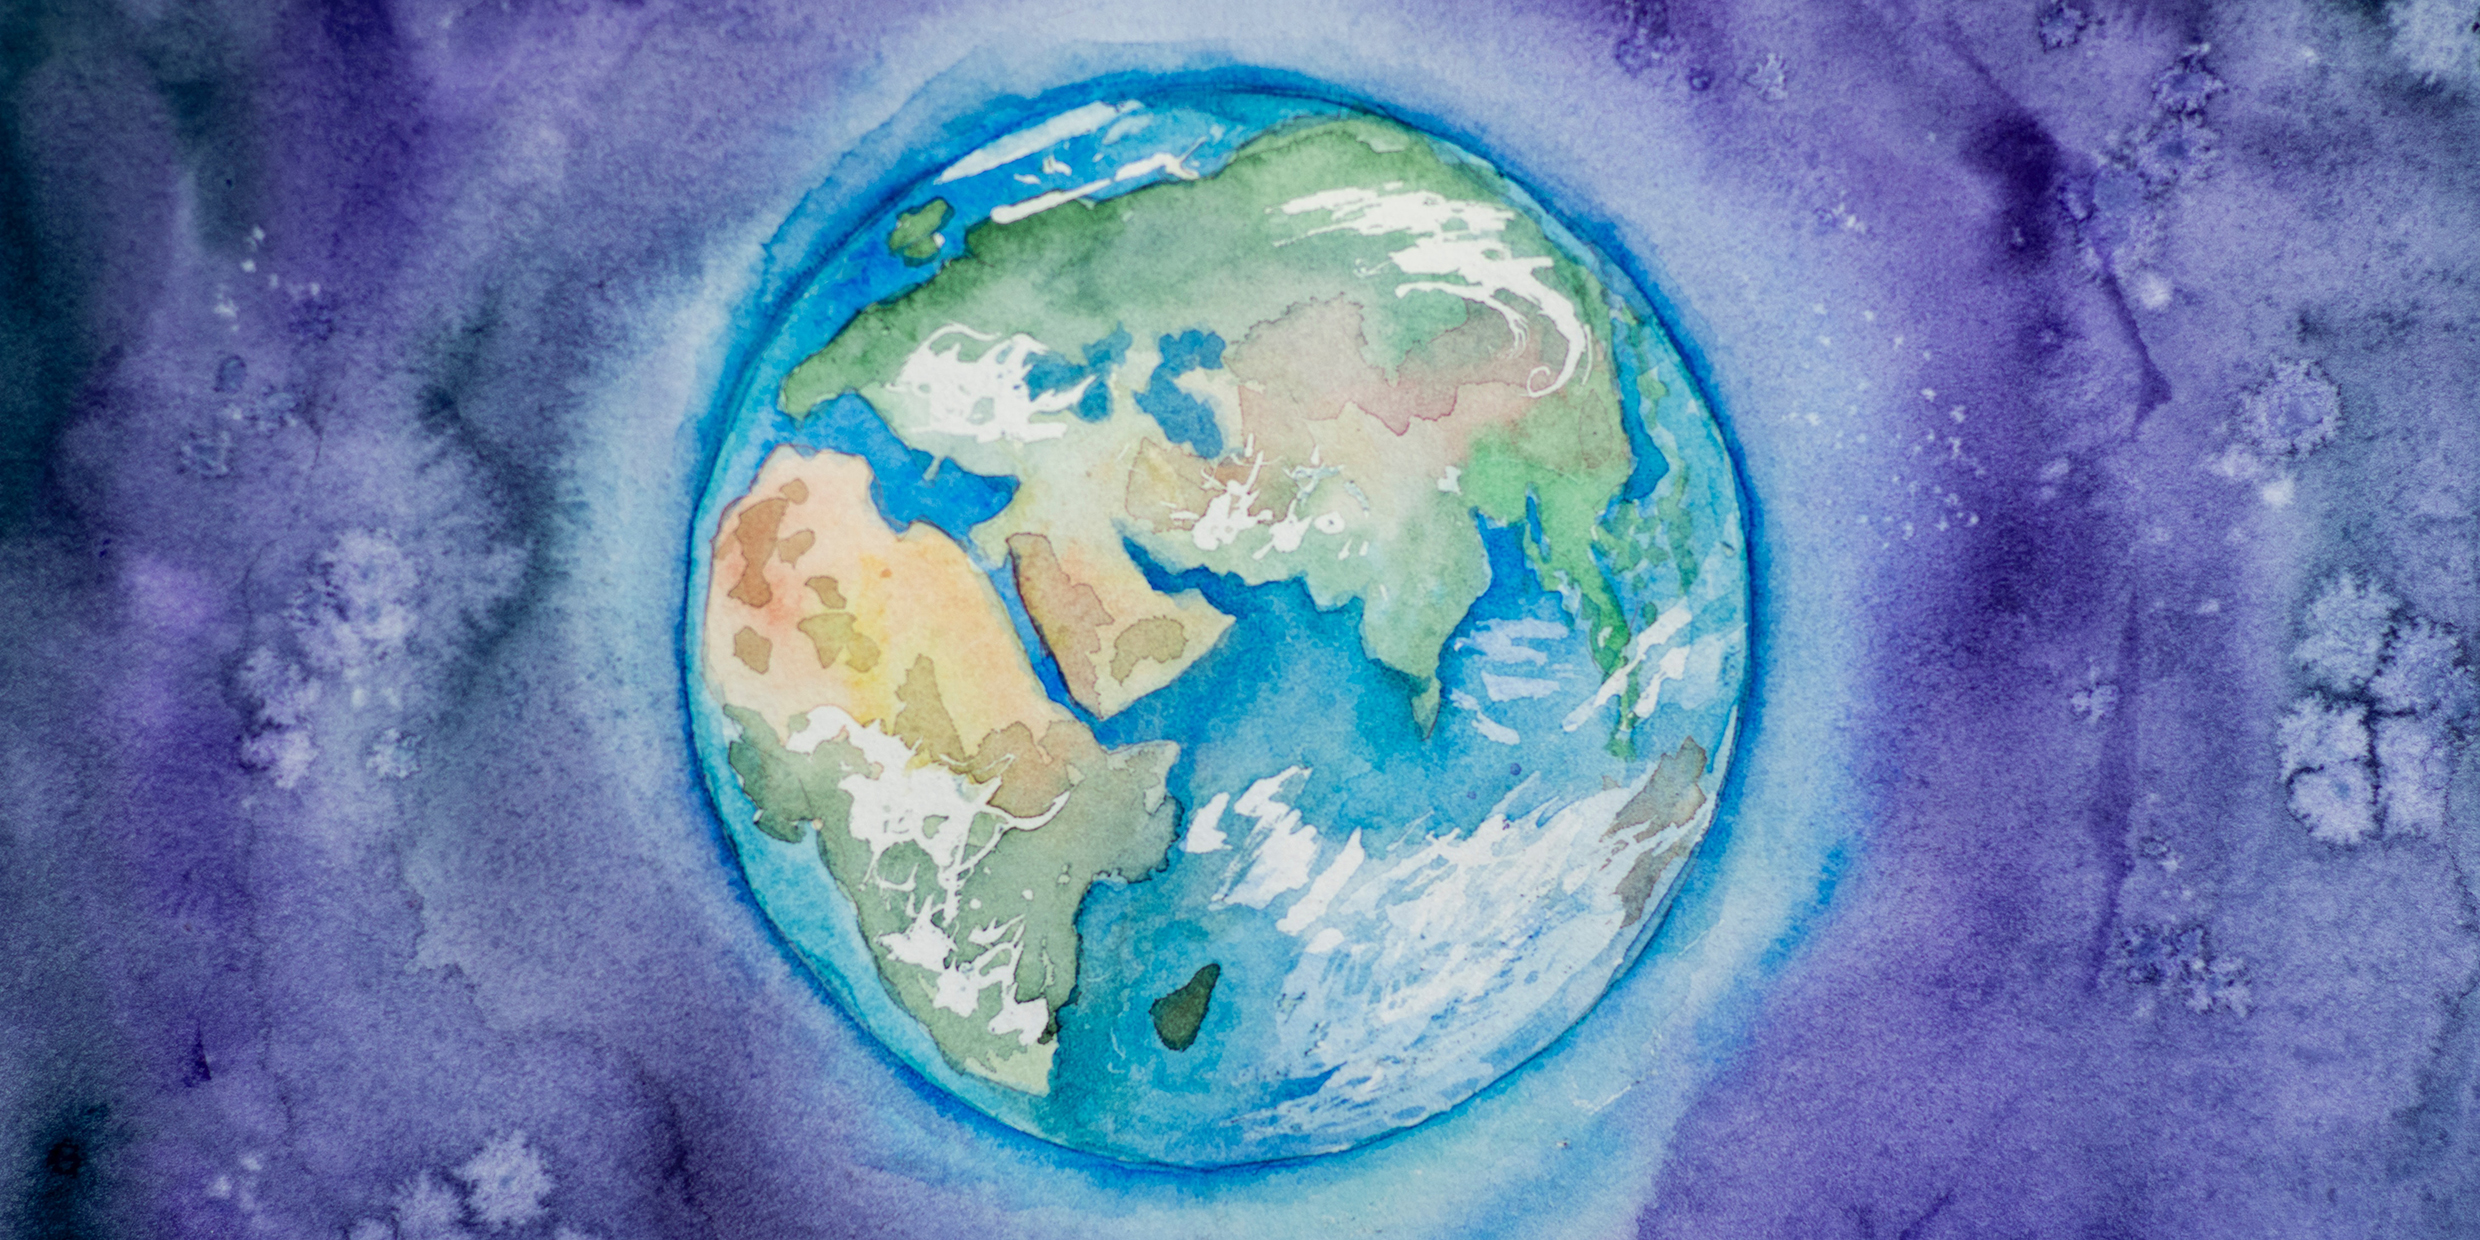 Watercolor painting of the blue-green earth on a purple background